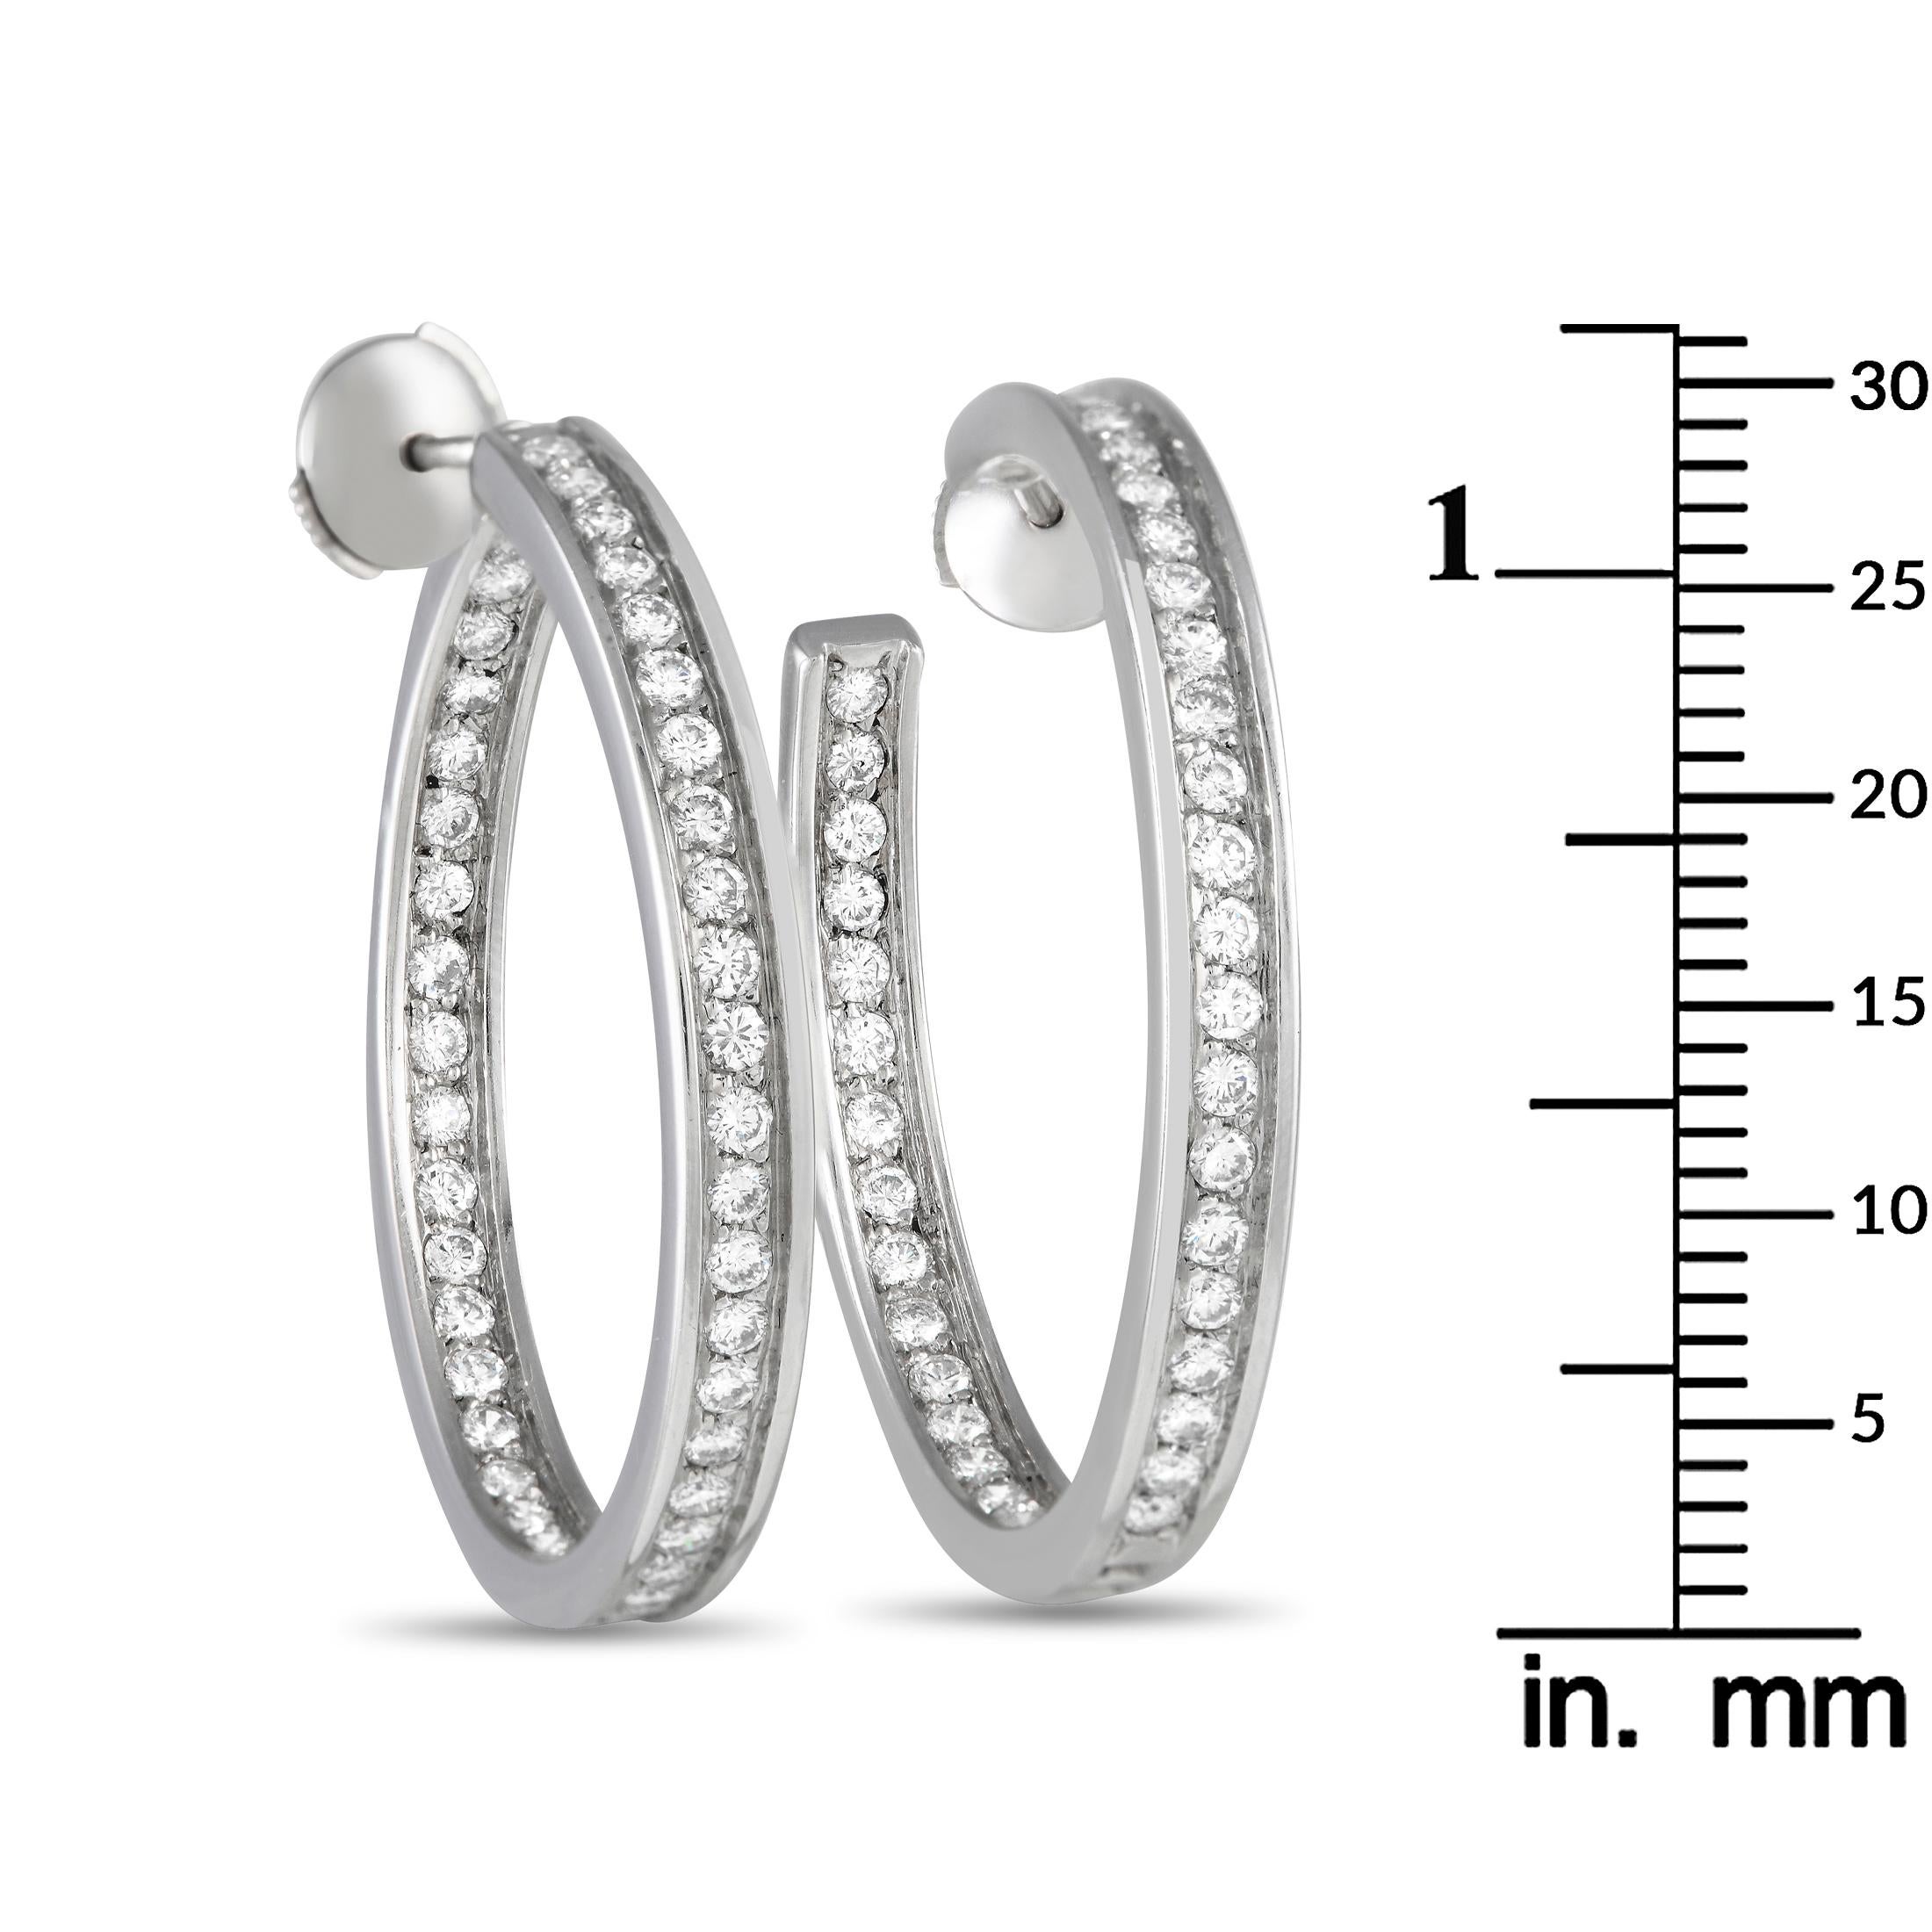 Cartier 18K White Gold 3.0ct Diamond Hoop Earrings In Excellent Condition For Sale In Southampton, PA